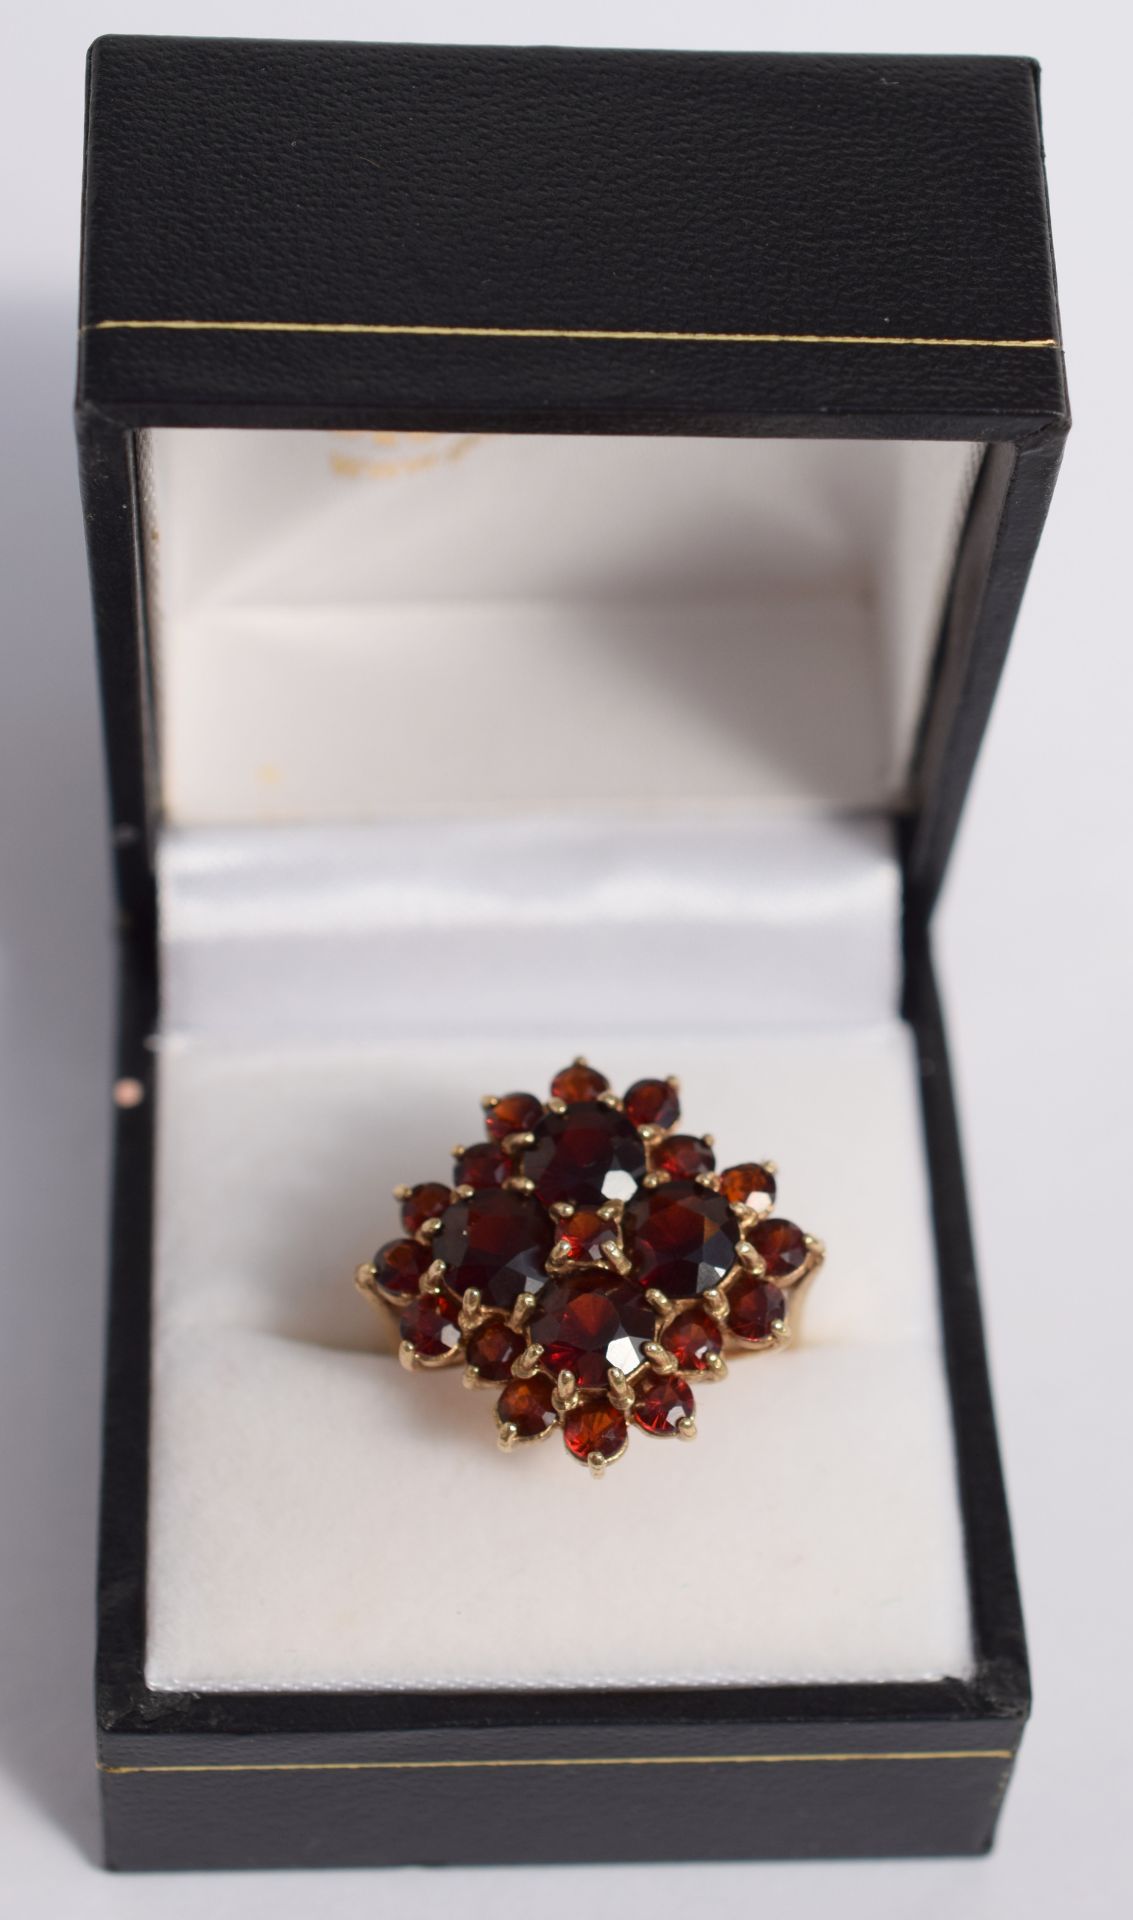 Vintage 9ct Gold Ring With 17 Small Garnets And Four Big Garnets